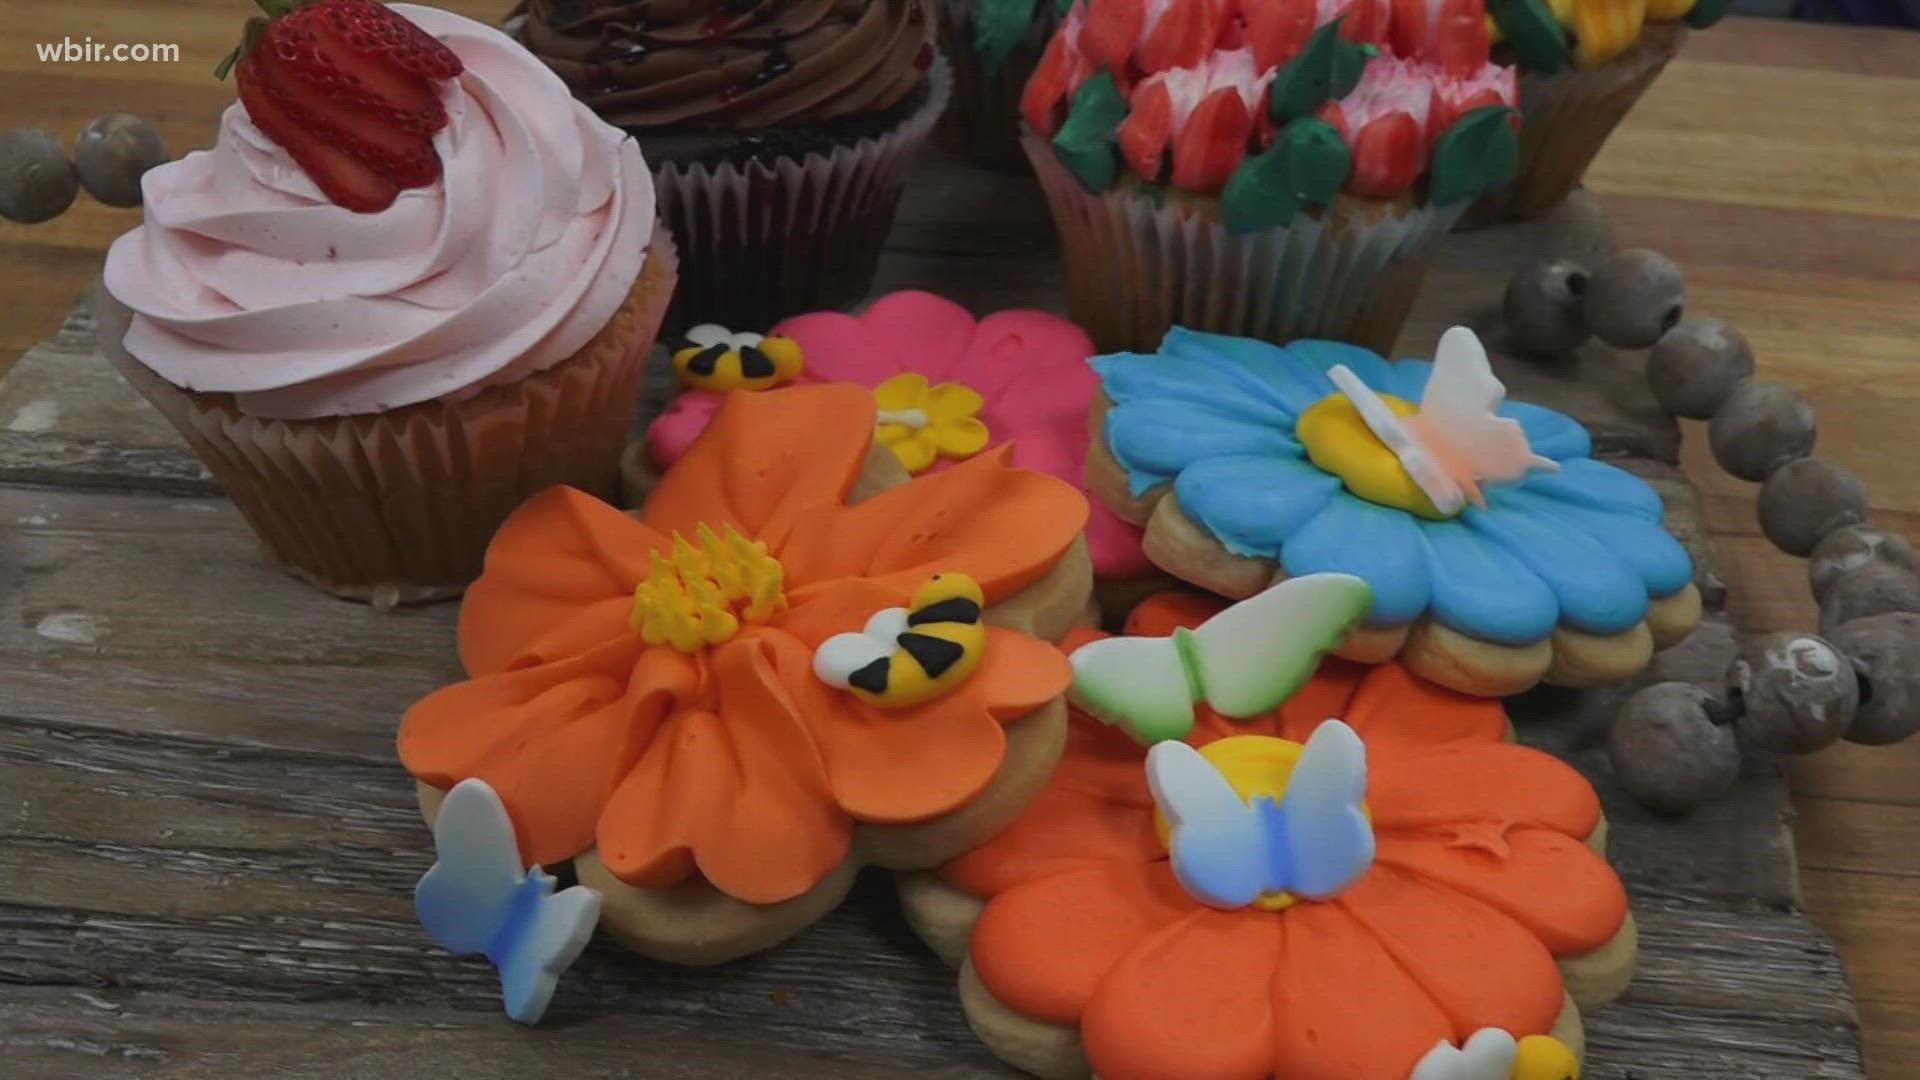 Sugar cookies, cupcakes and pastries are the sweet treats targeting your taste buds at the spring festival.